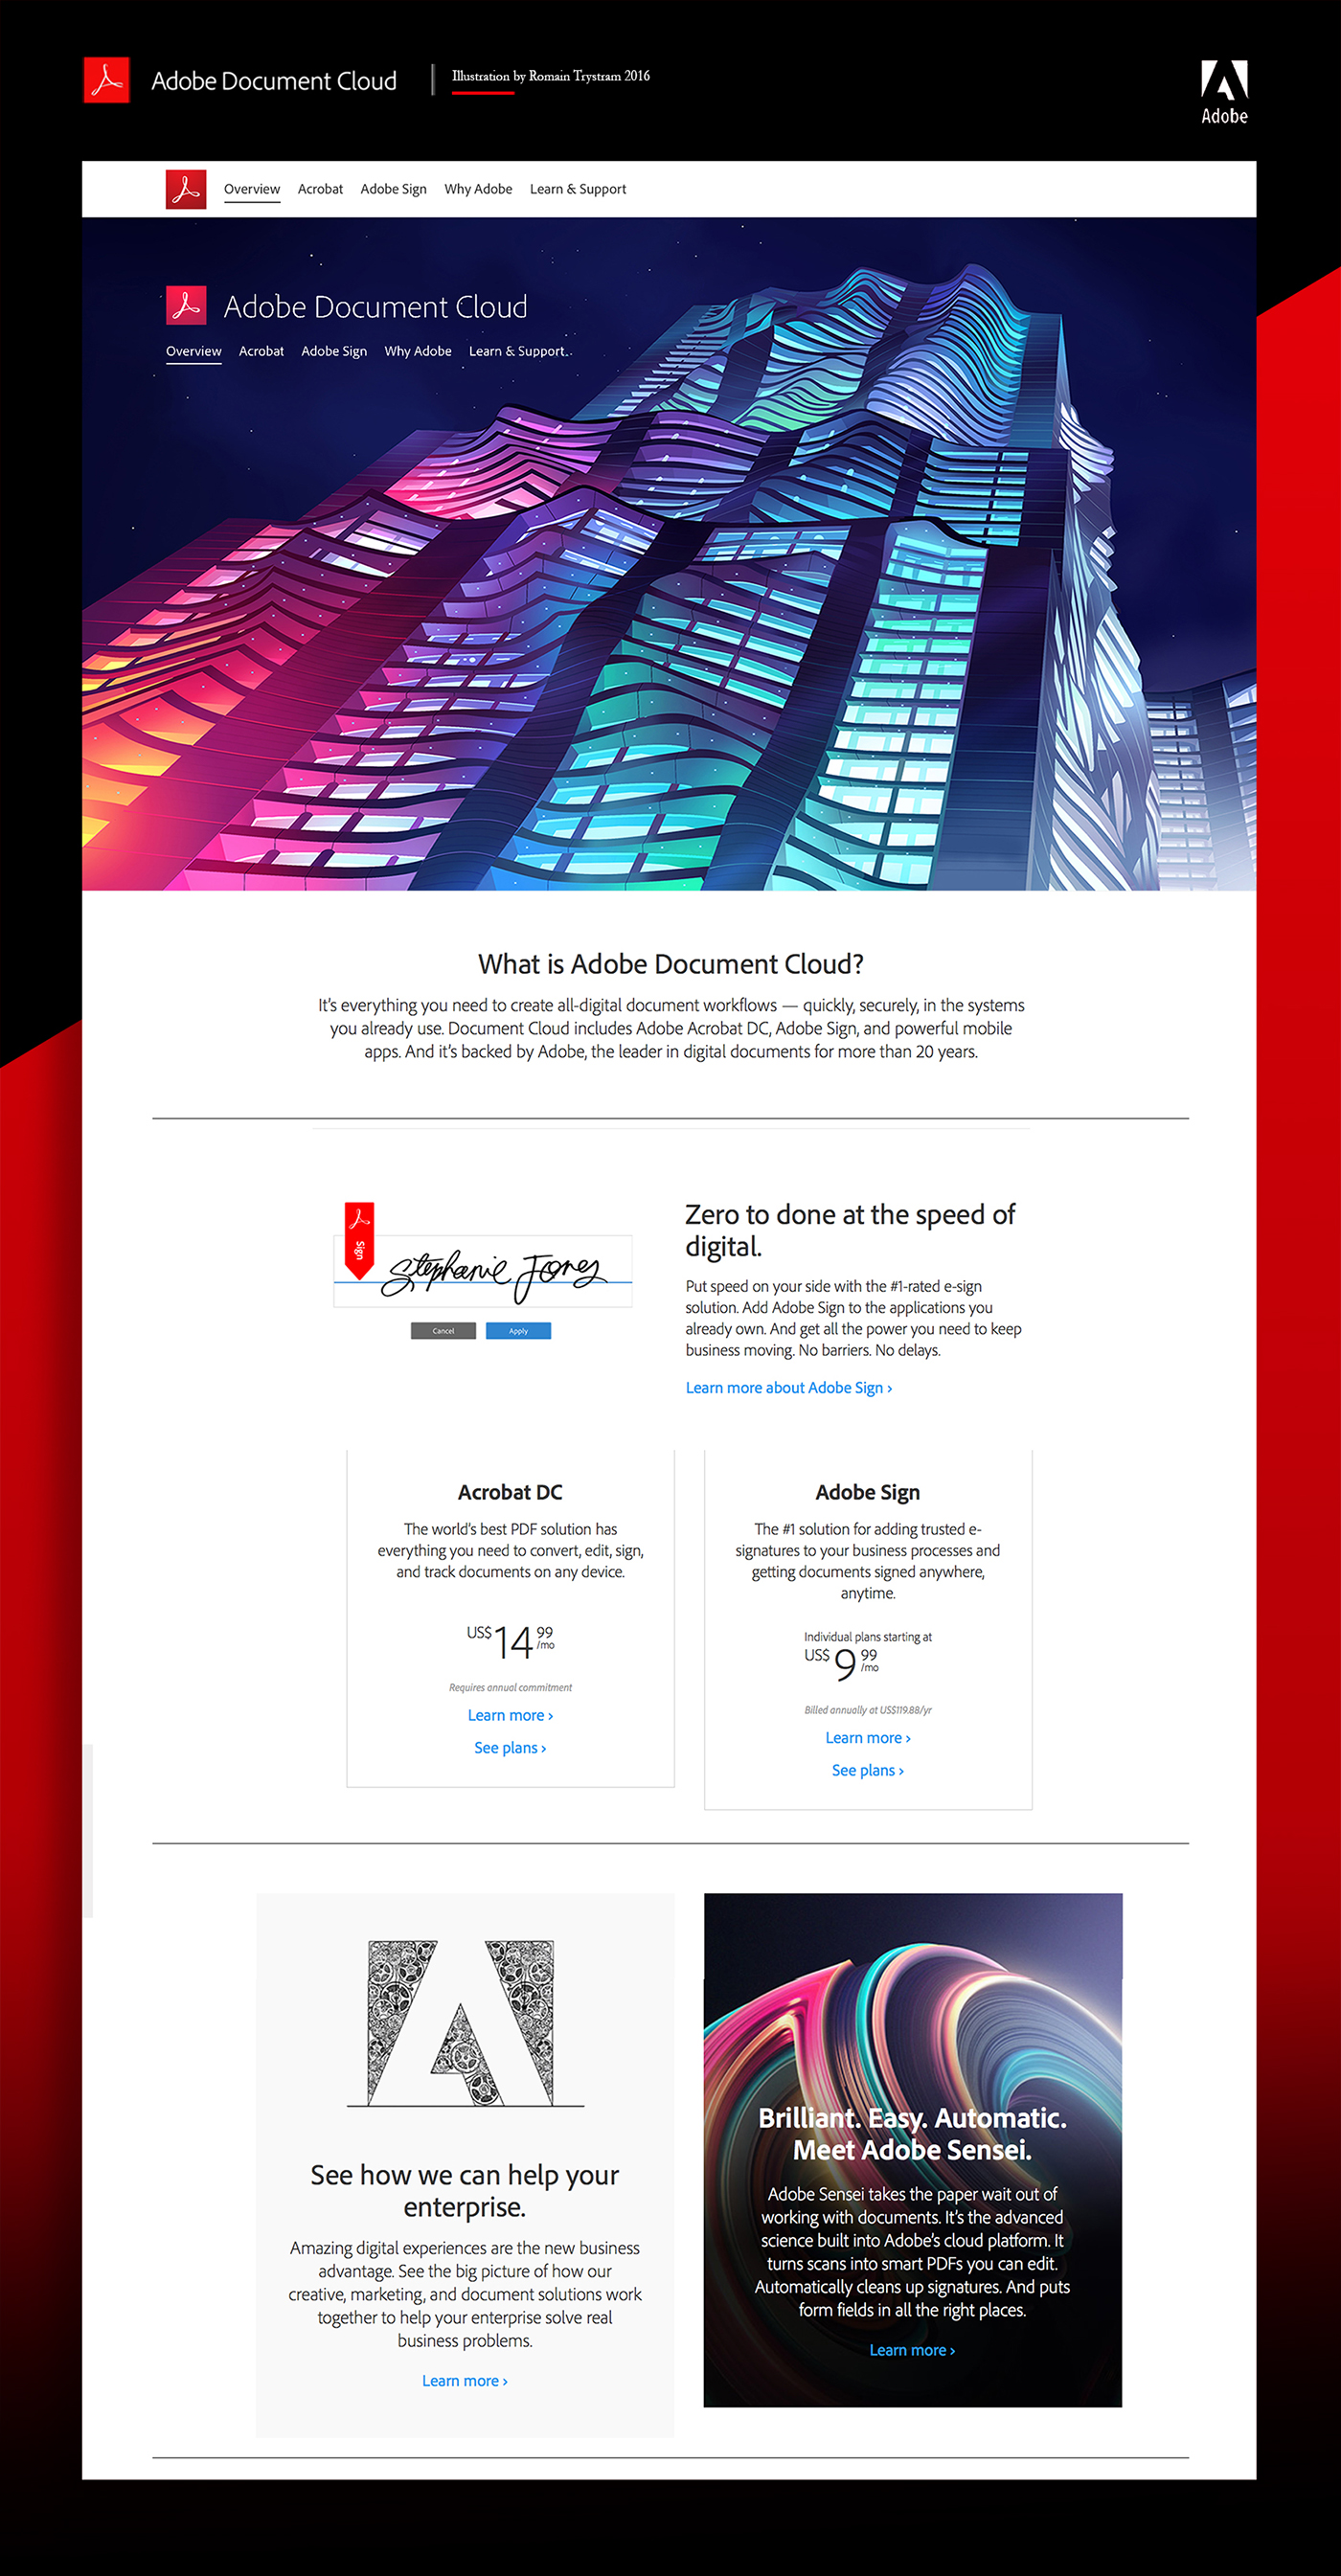 adobe cloud document colorfull skycrapper building spruce New York city neon